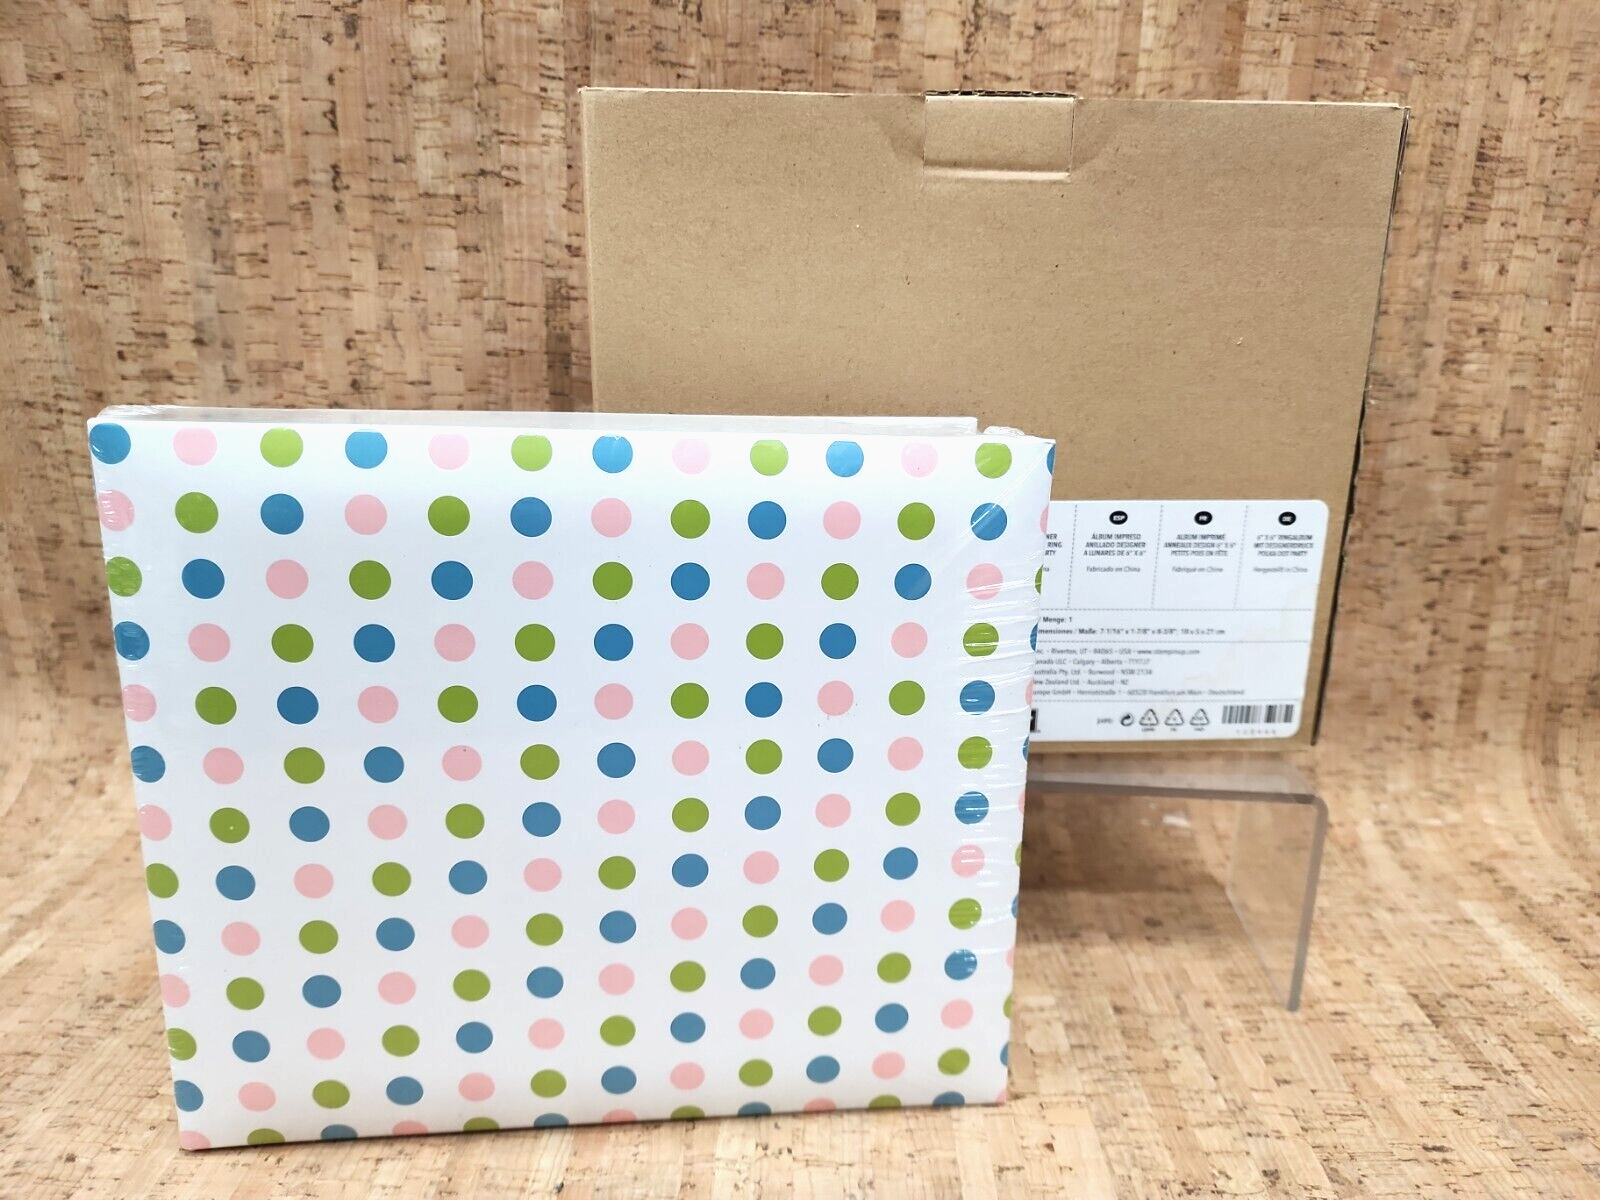 Stampin' UP!  6x6" Designer Polka Dot Party Photo Album w/Page Covers 122466 NIB - $24.74